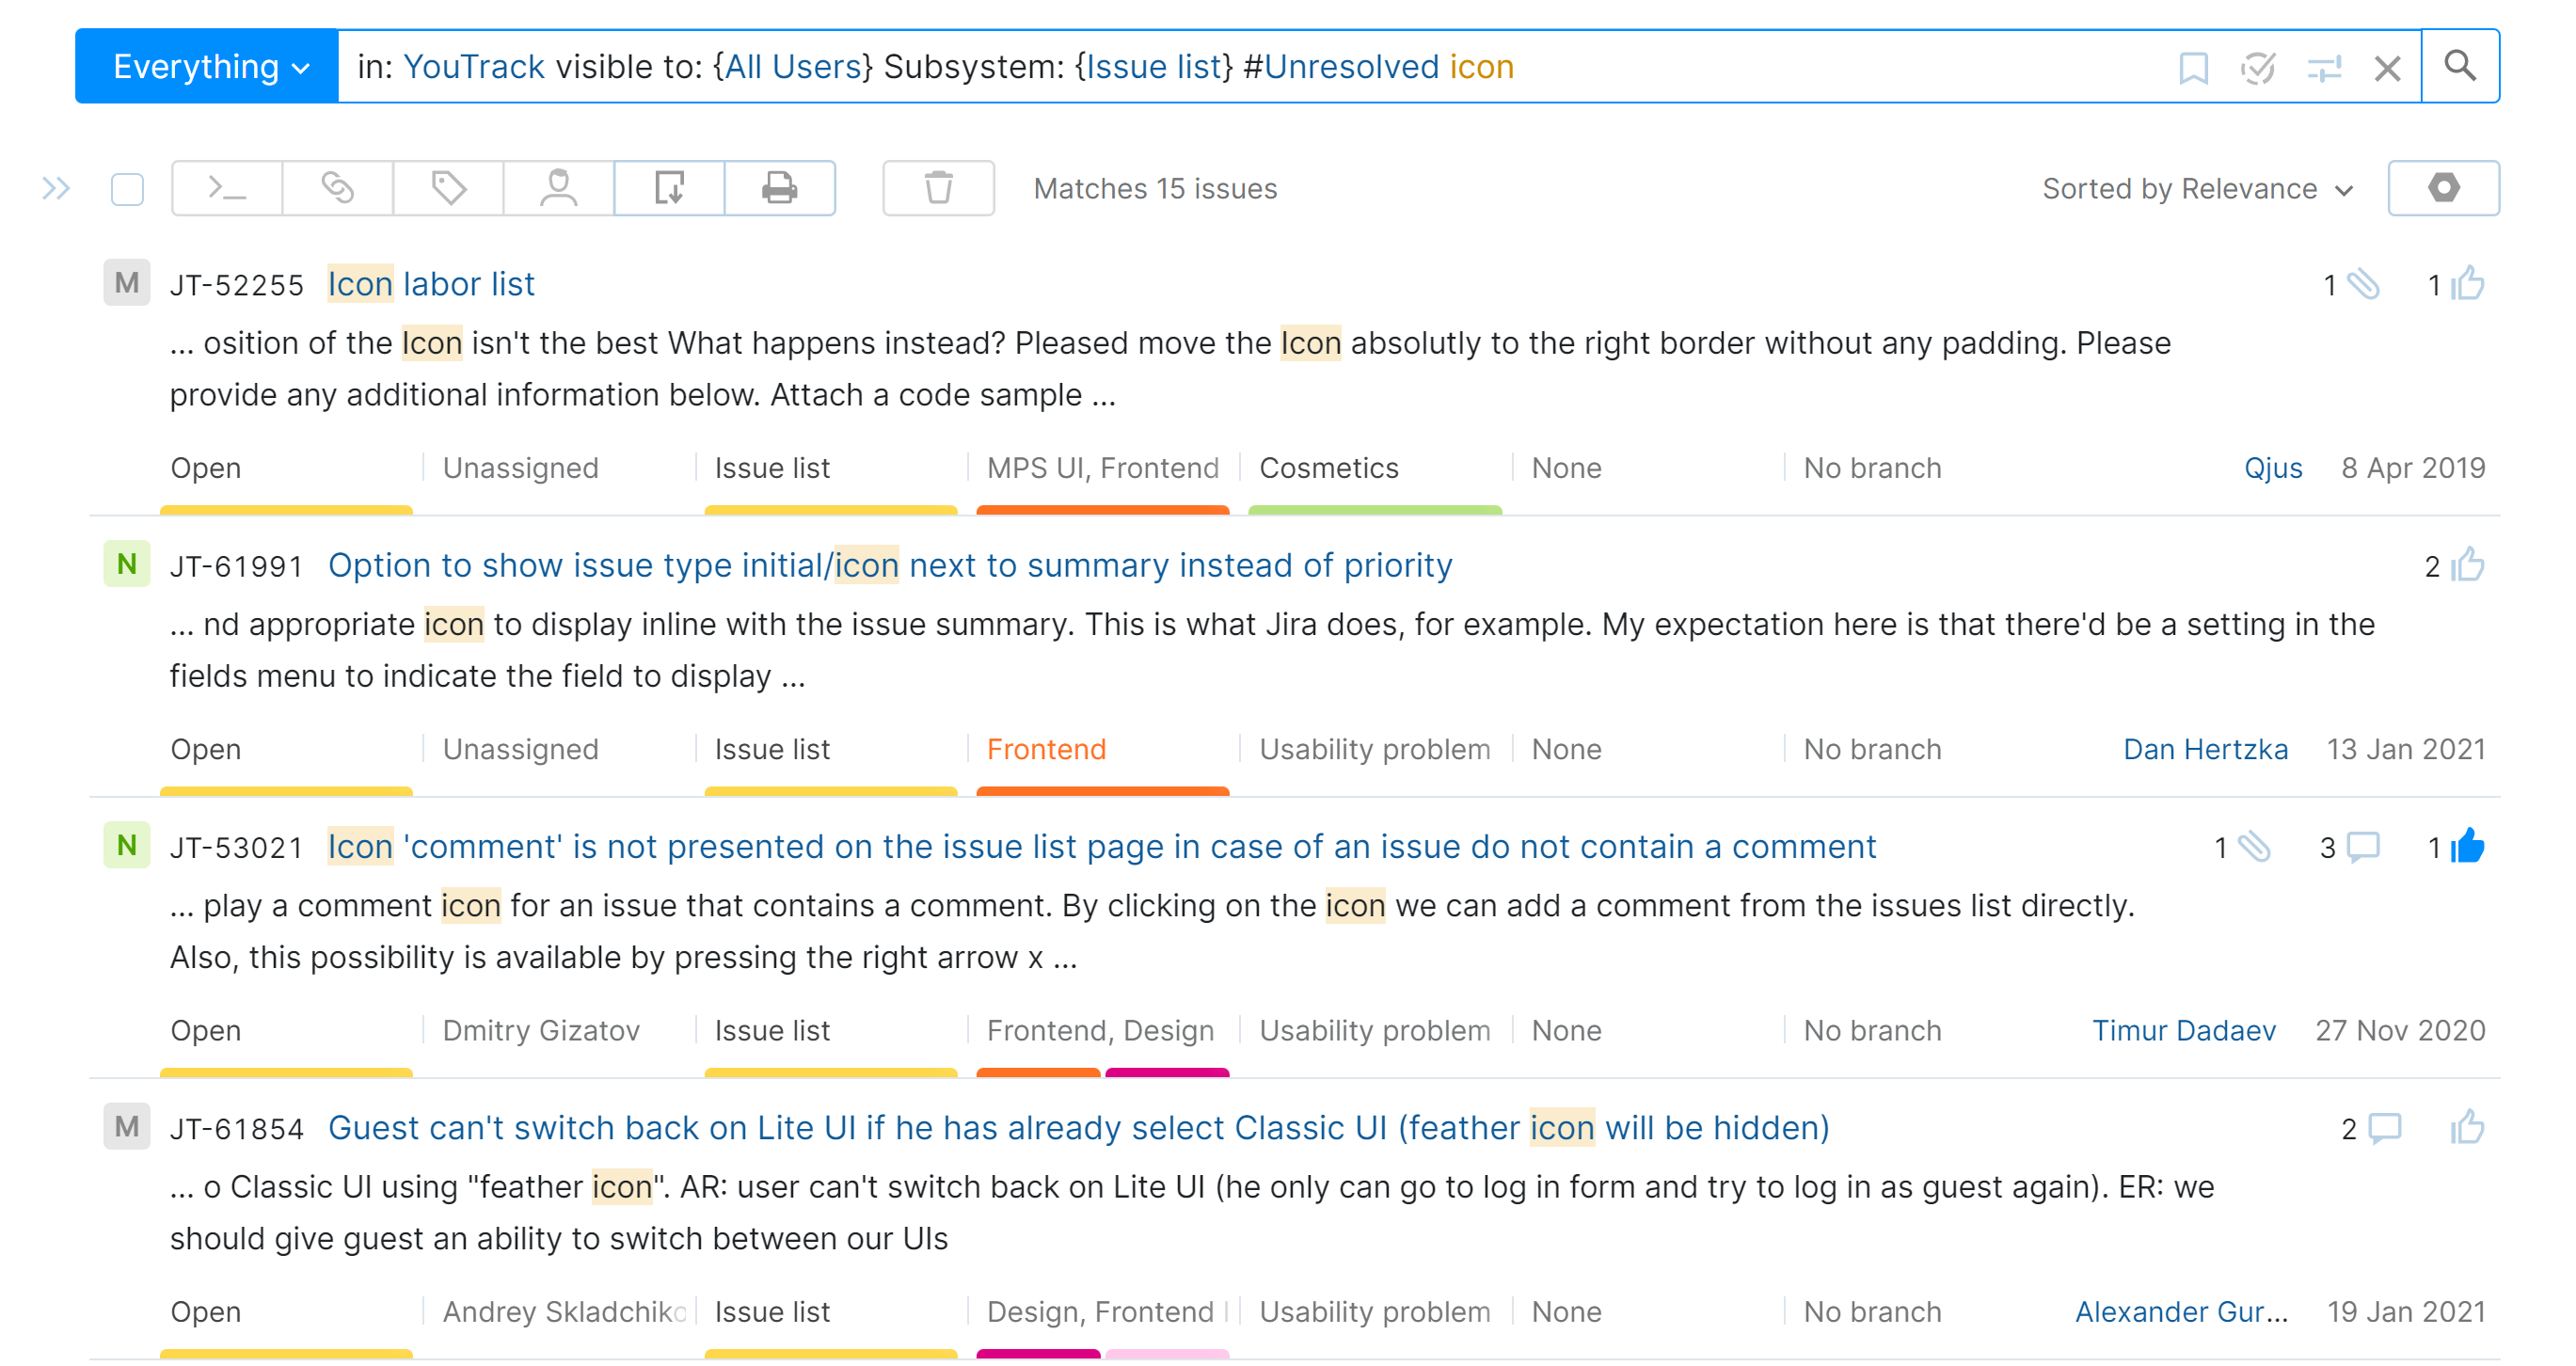 Text-based search query with highlighting applied to matching word forms in the search results.